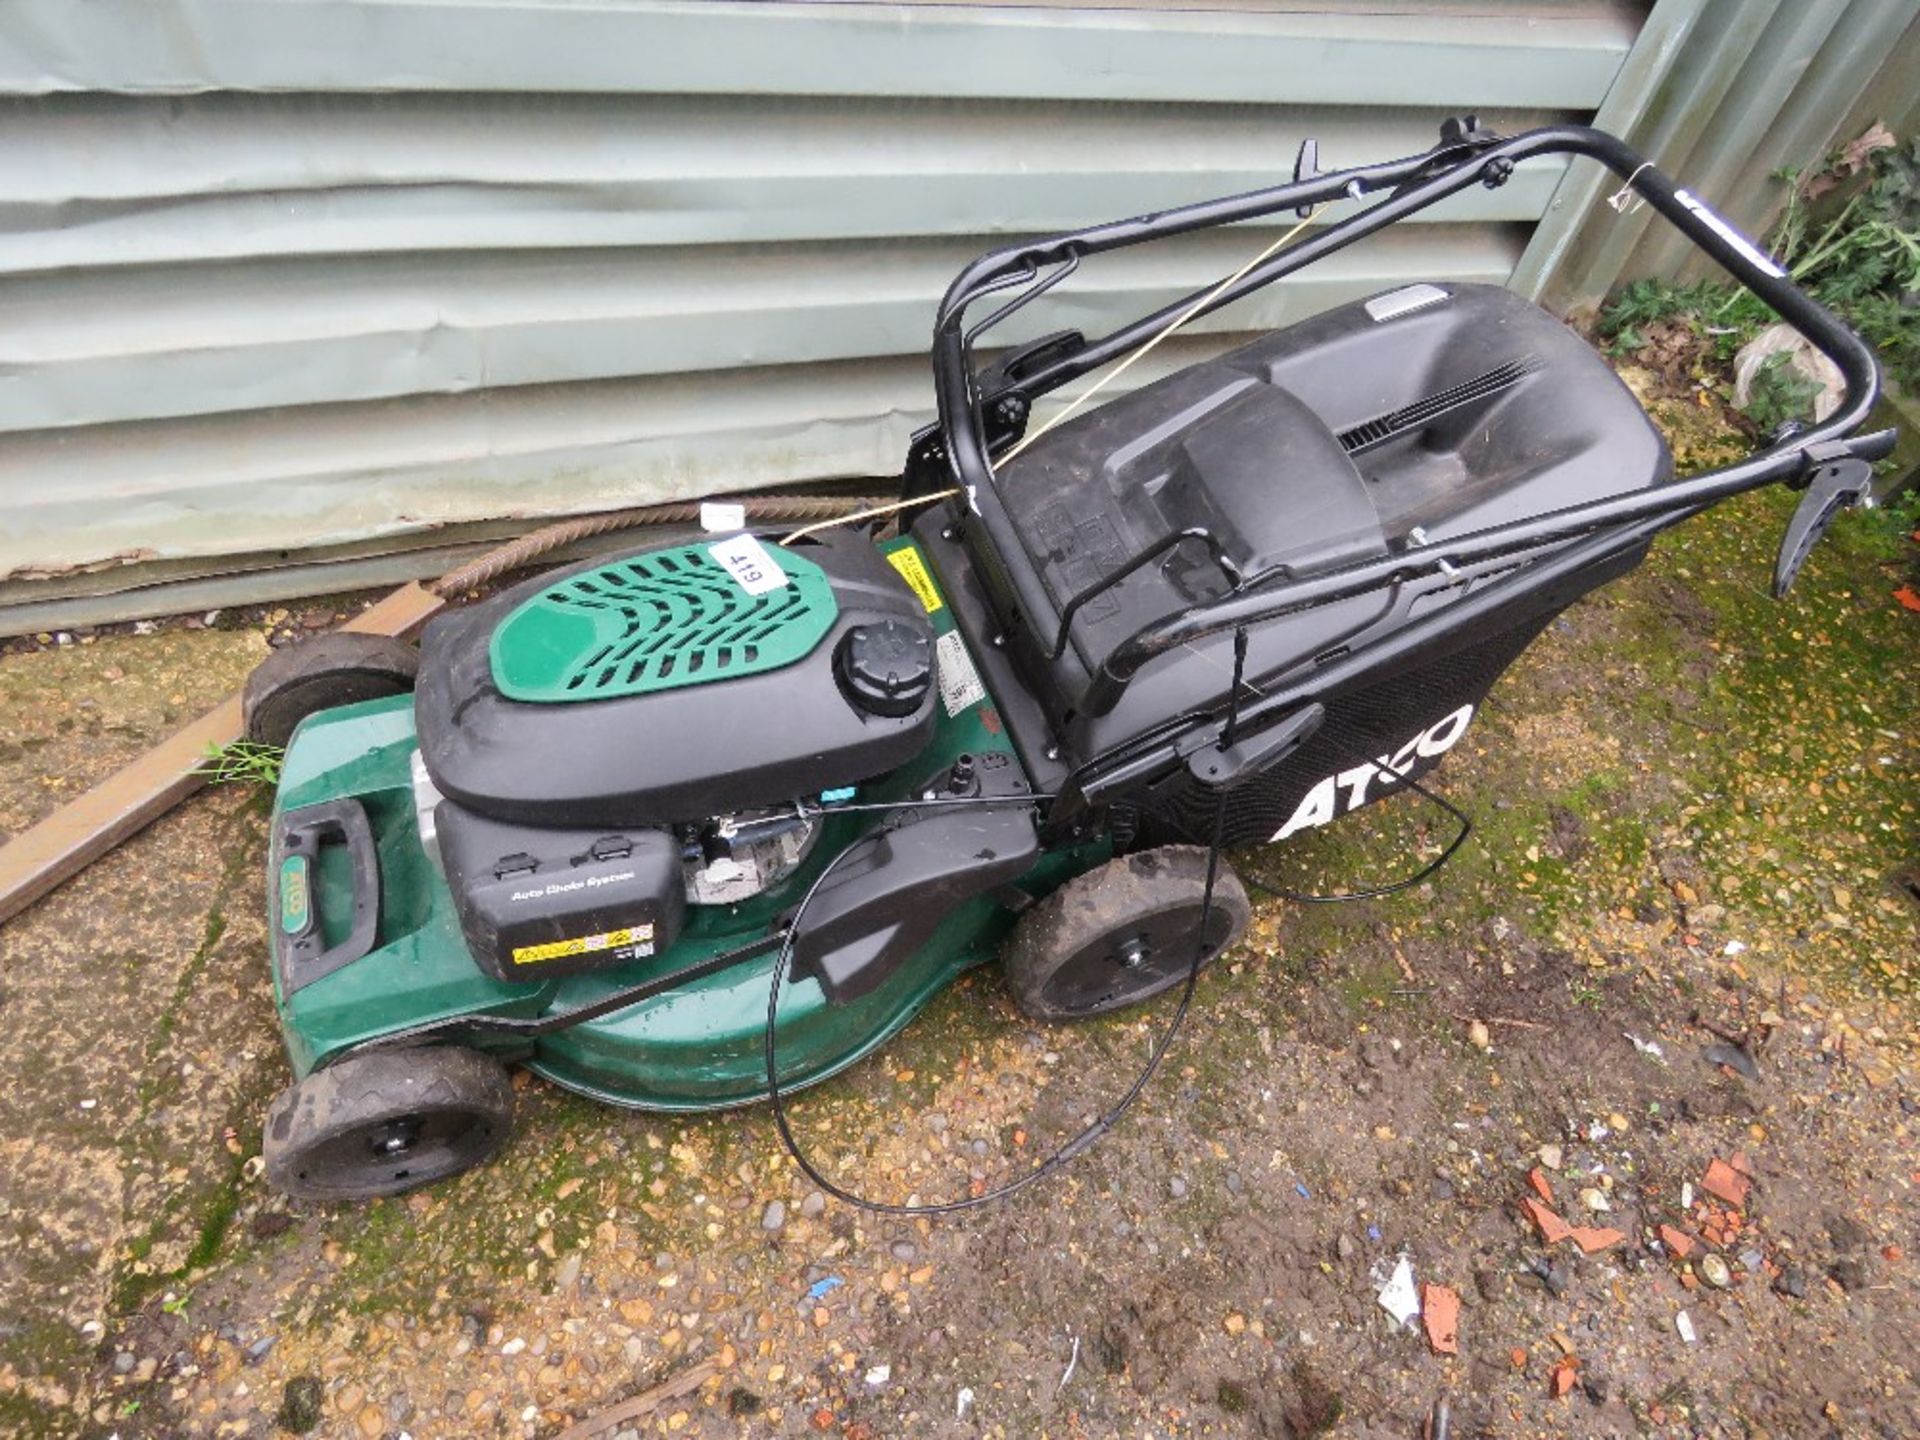 ATCO LAWNMOWER WITH A COLLECTOR. DIRECT FROM LOCAL LANDSCAPE COMPANY WHO ARE CLOSING A DEPOT.